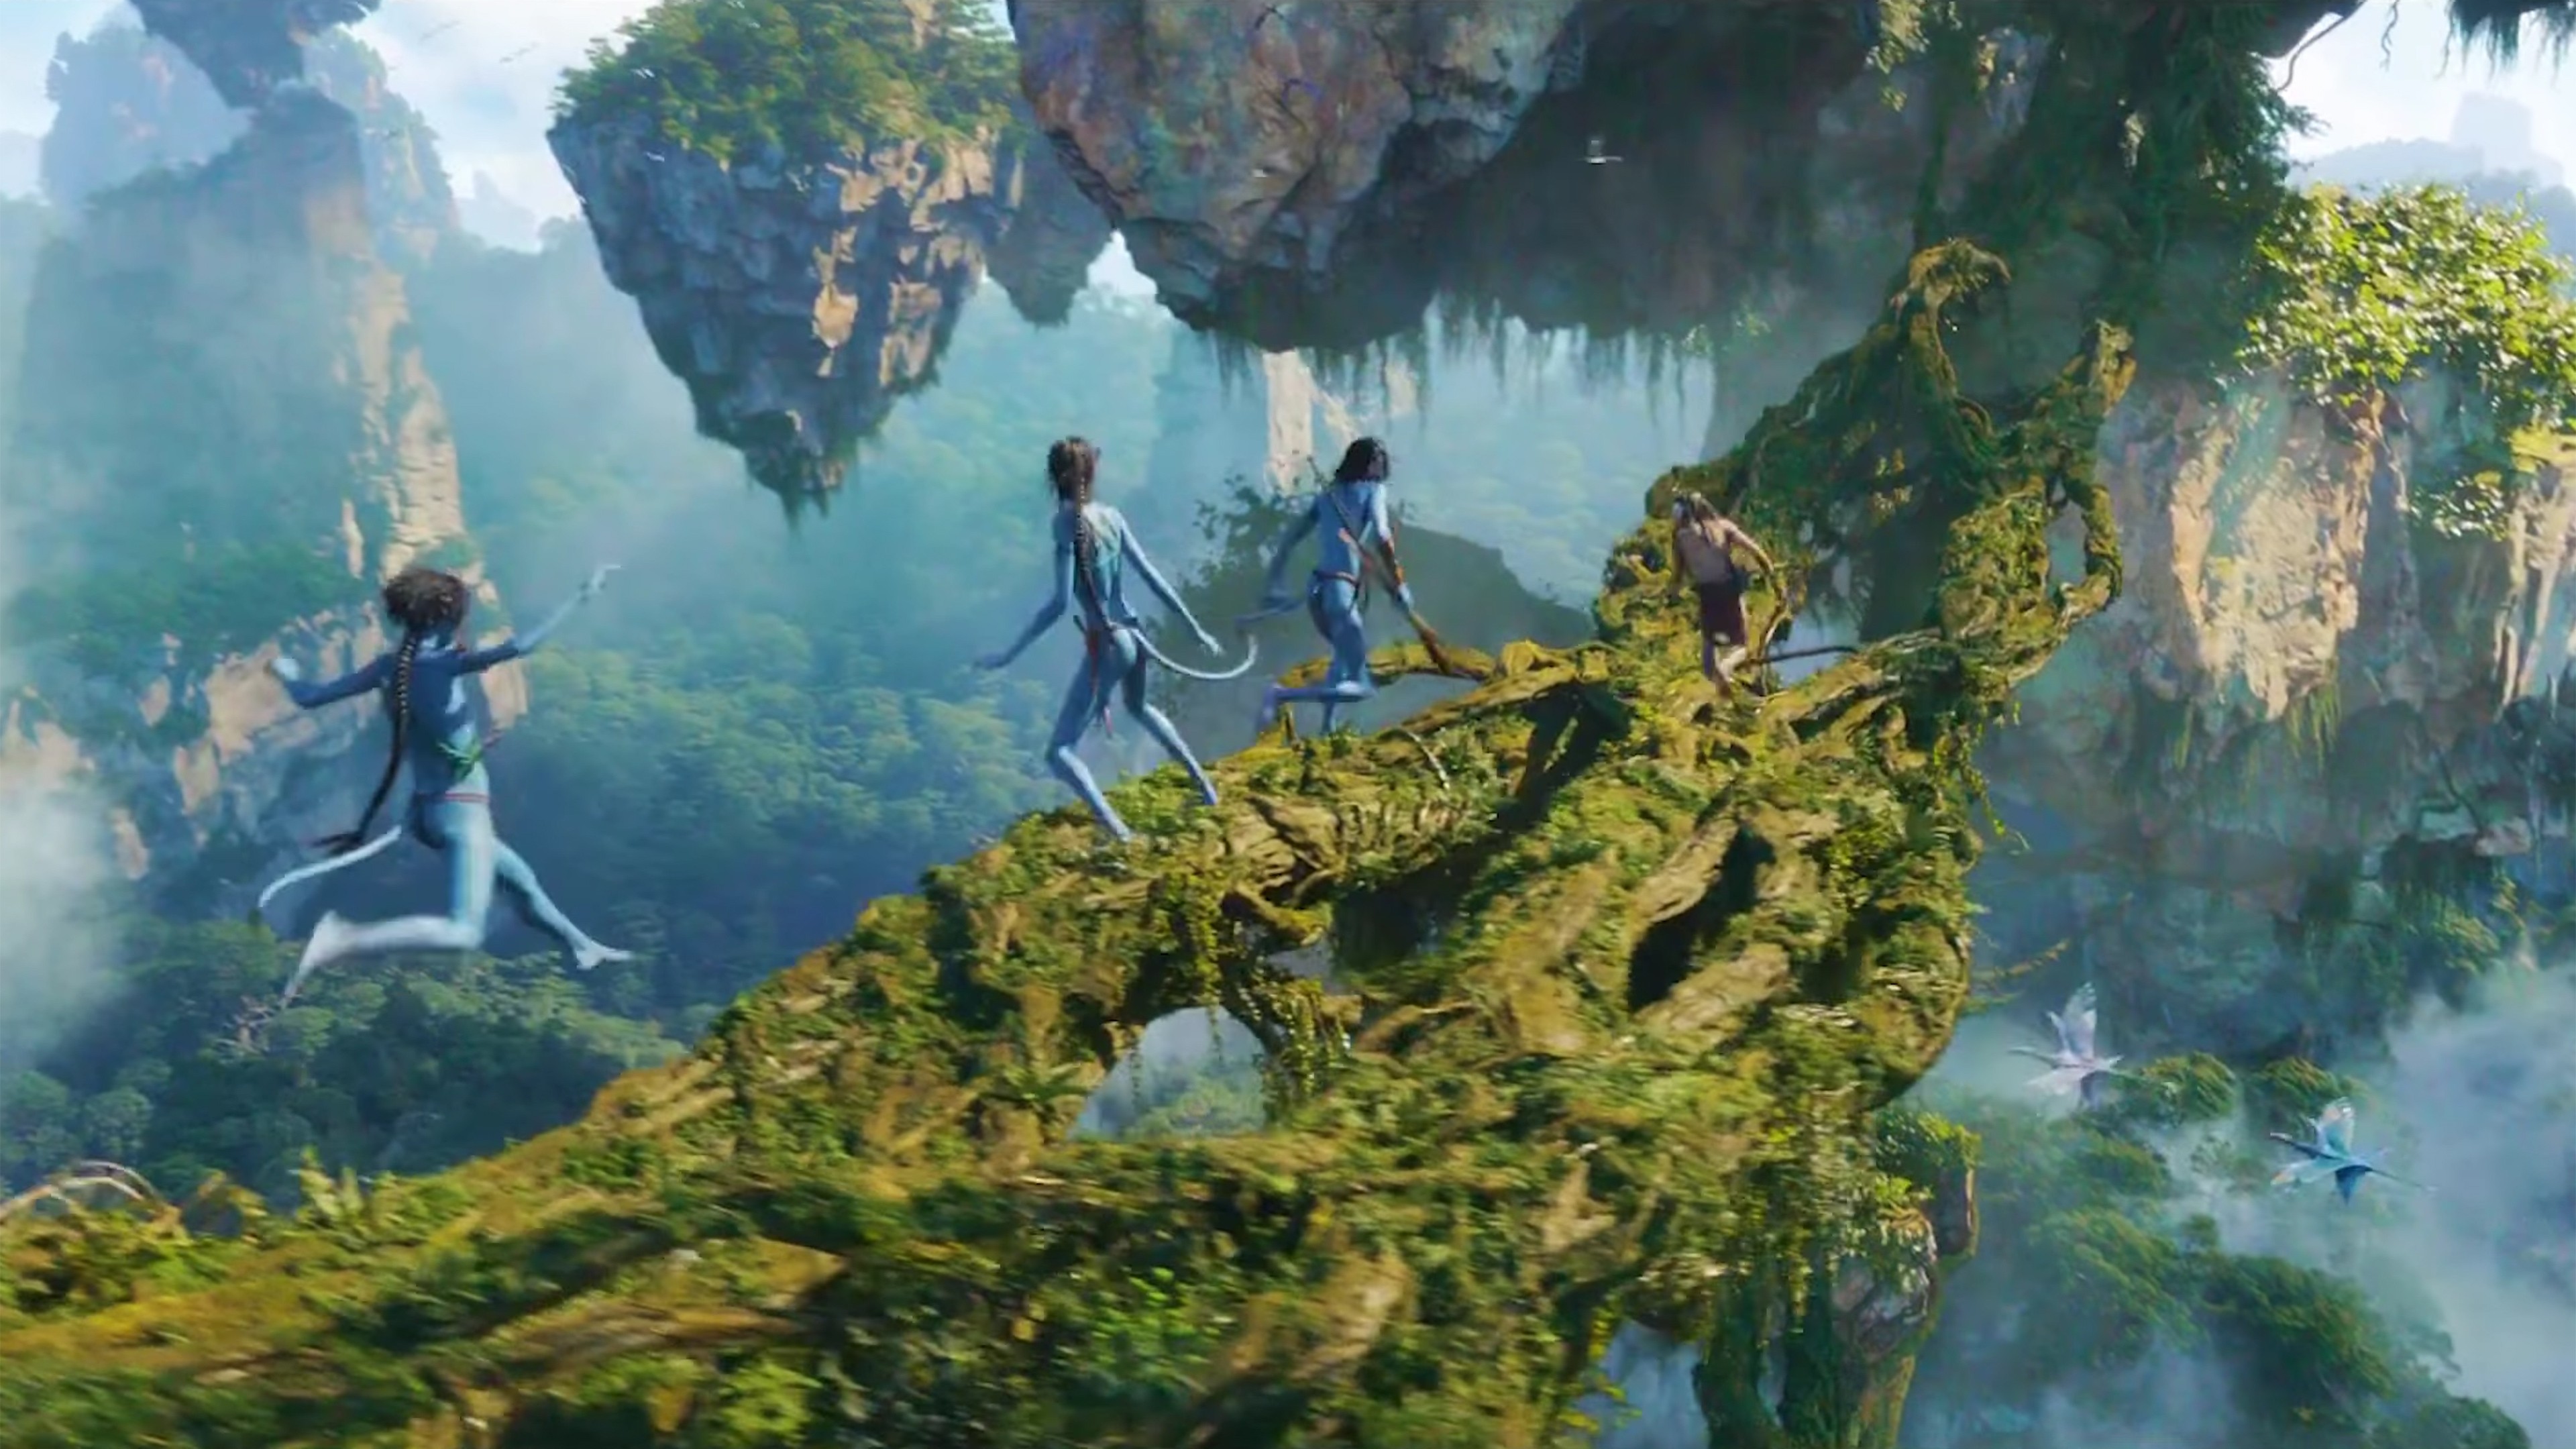 Wallpaper Avatar 2 The Way of Water, 4k, trailer, Movies